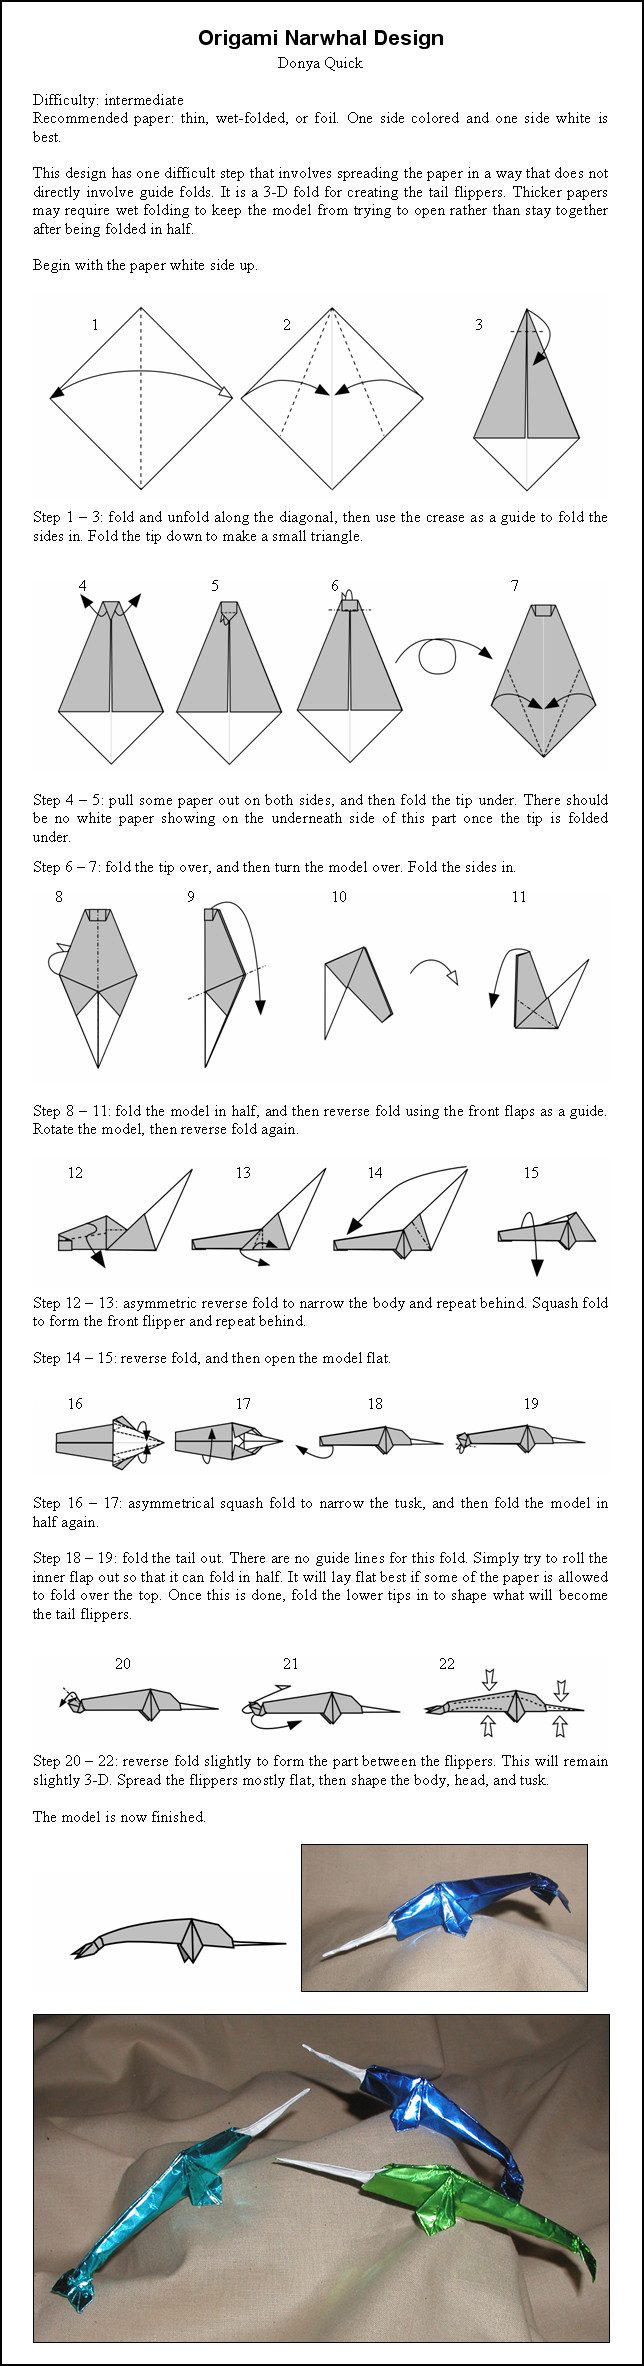 Origami Narwhal Instructions